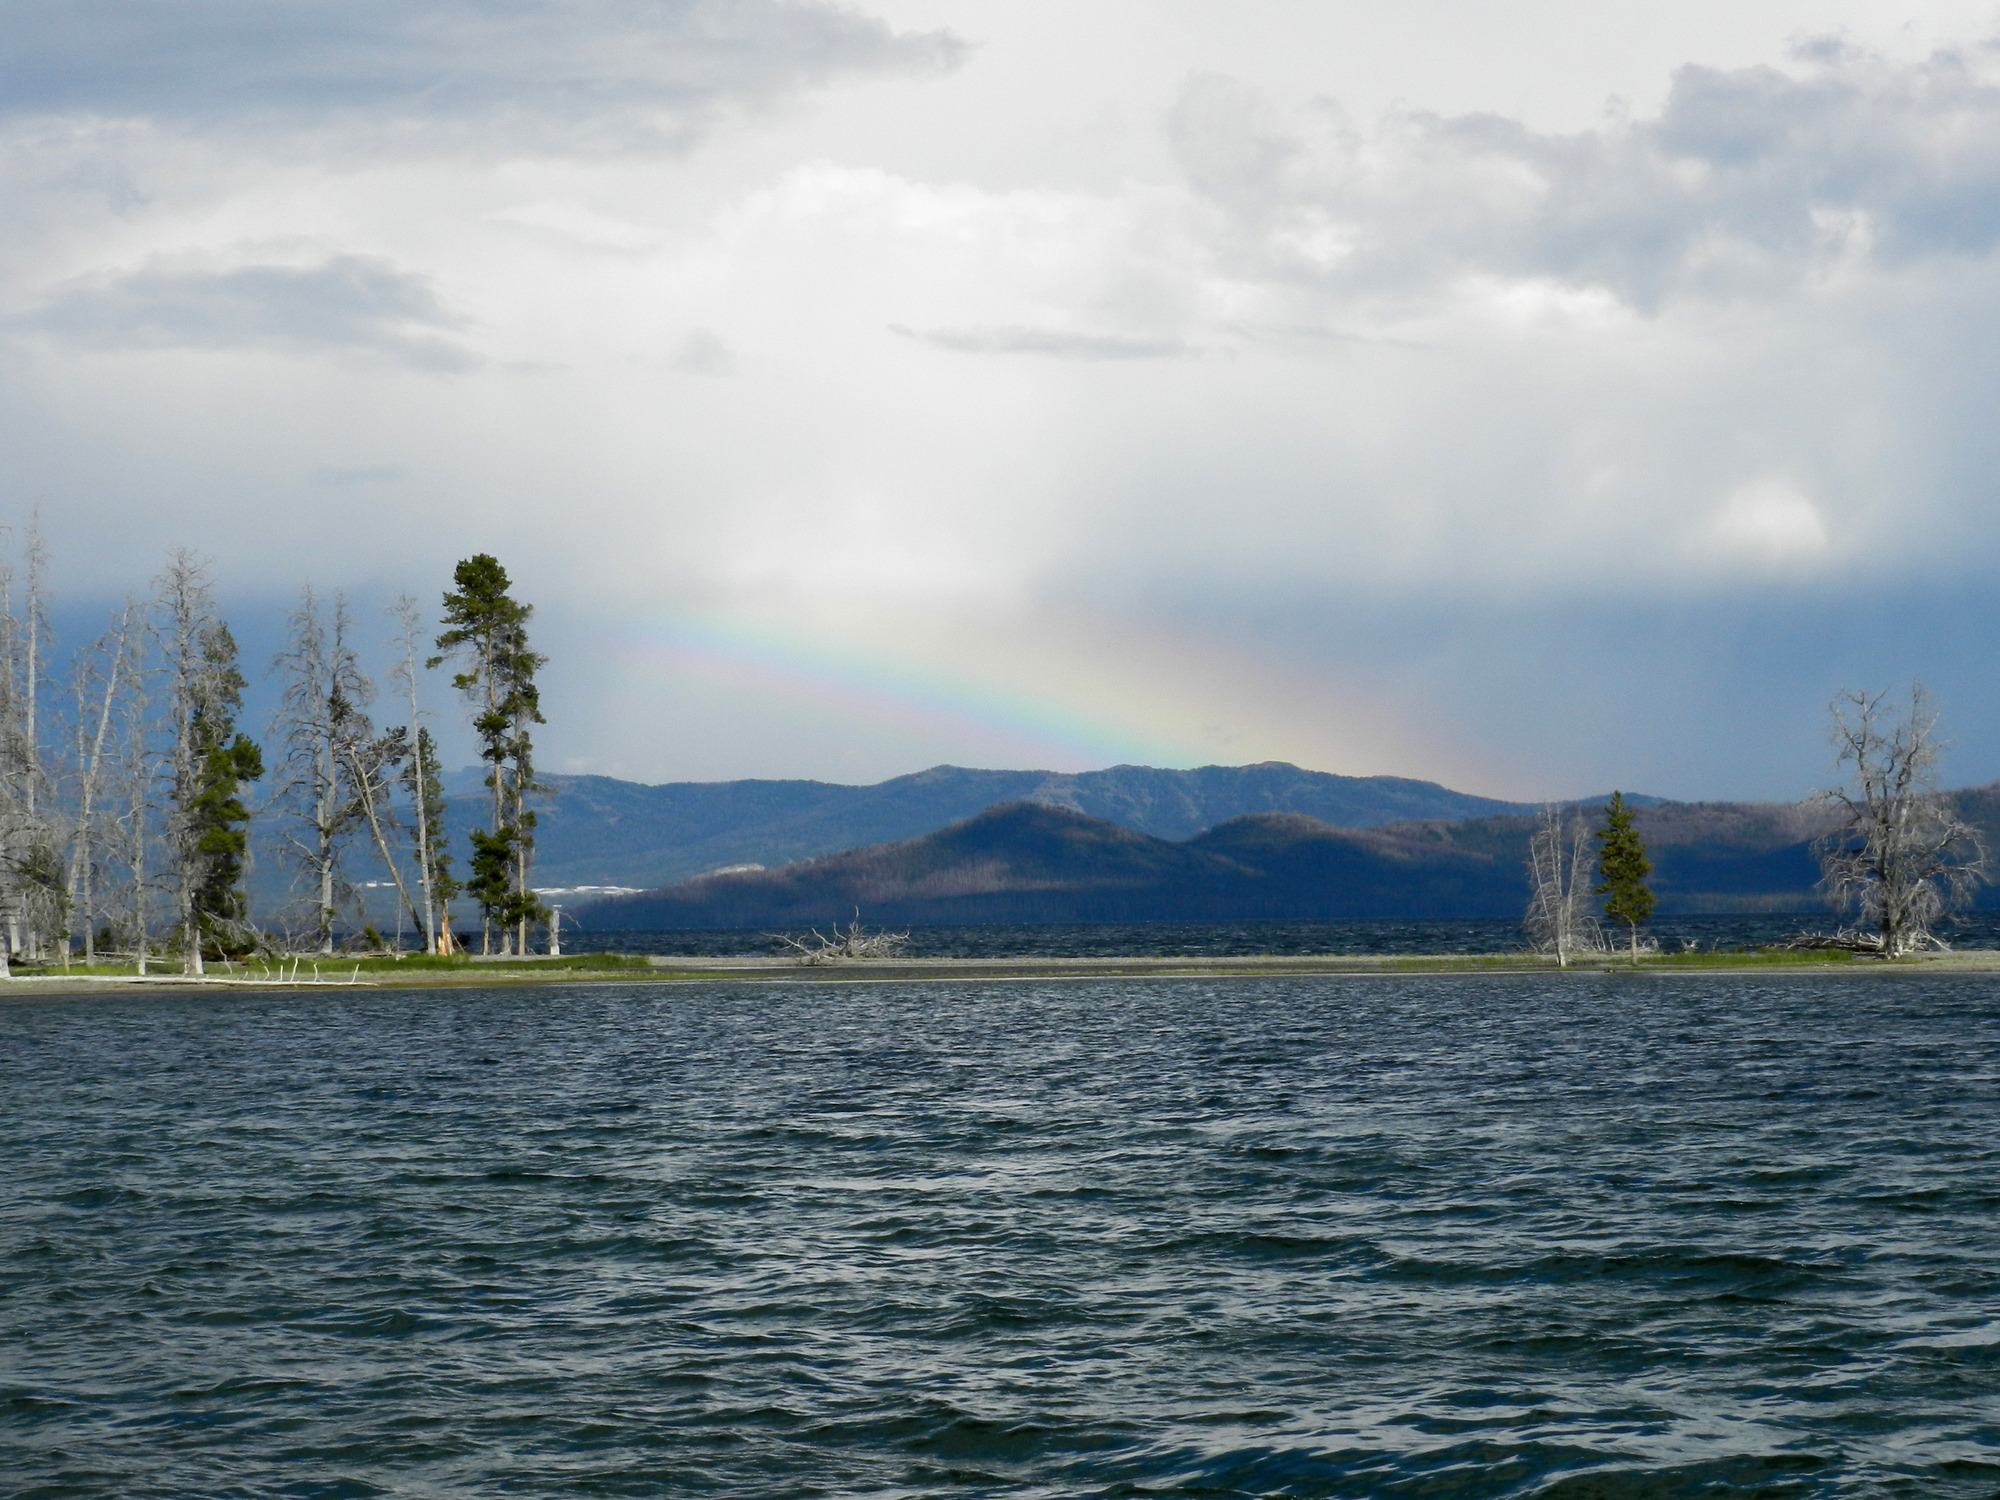 Looking across a choppy lake at clouds and a rainbow